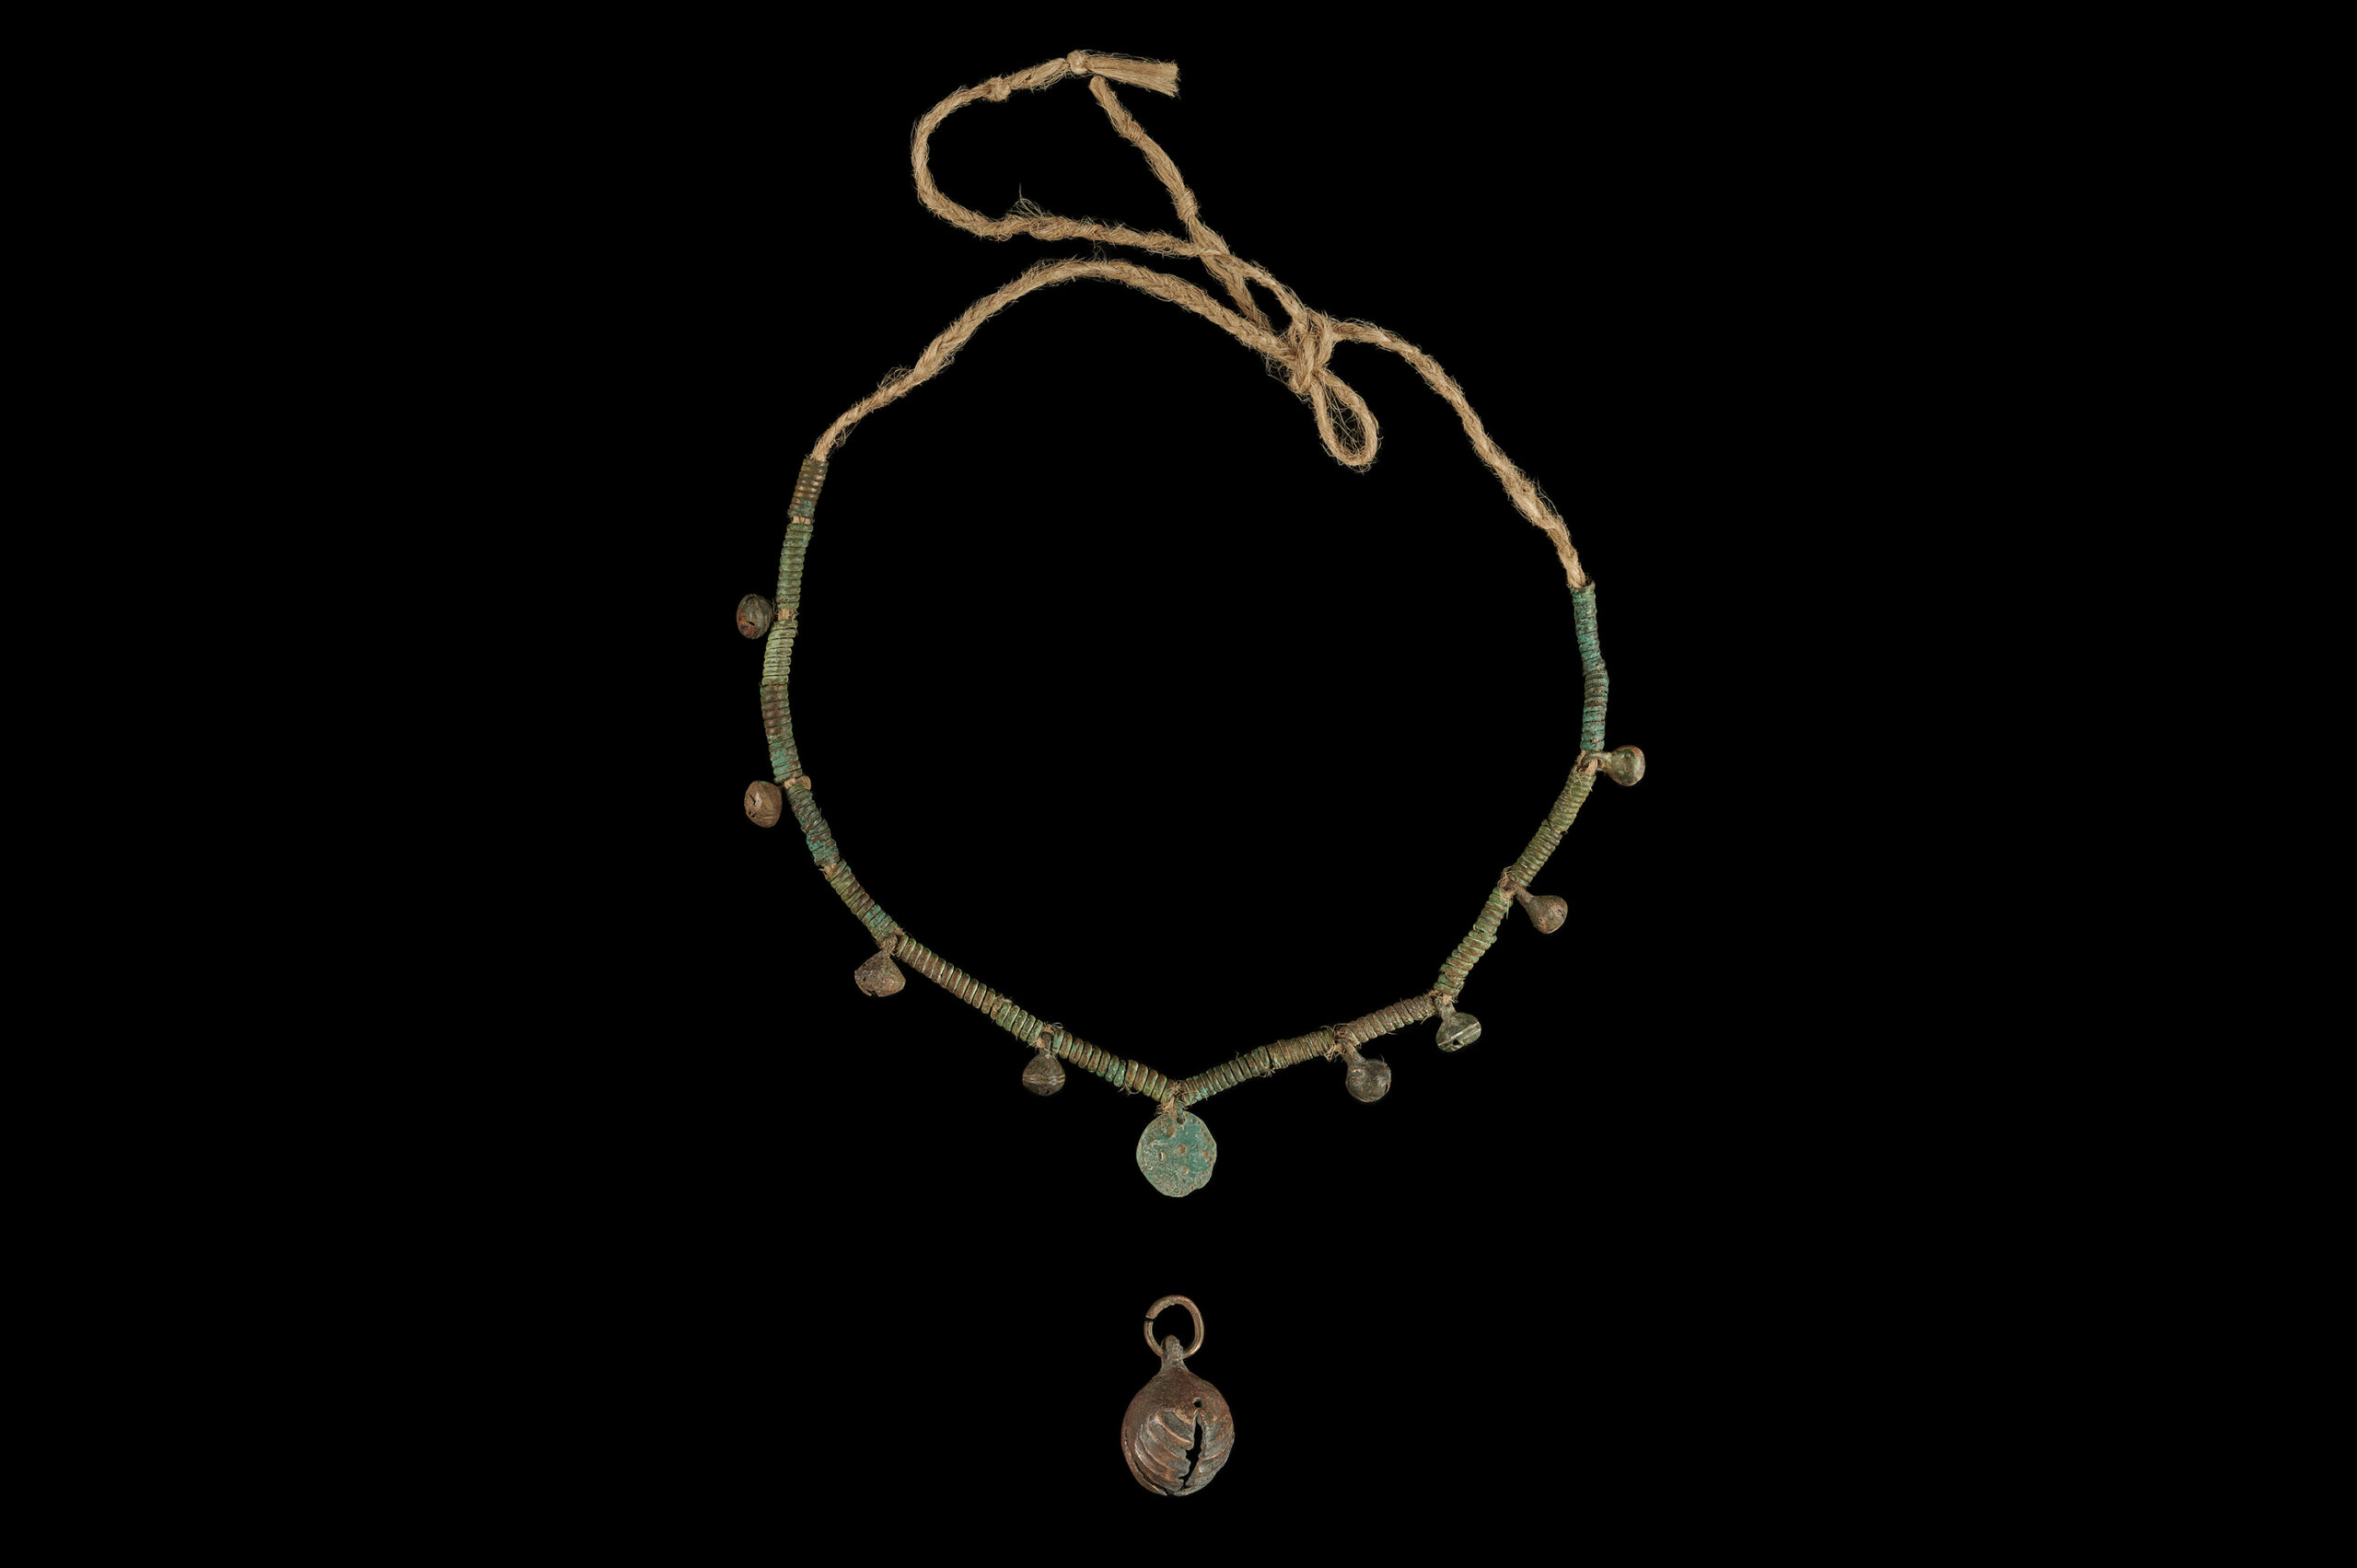 VIKING BRONZE NECKLACE WITH PENDANT AND BELL